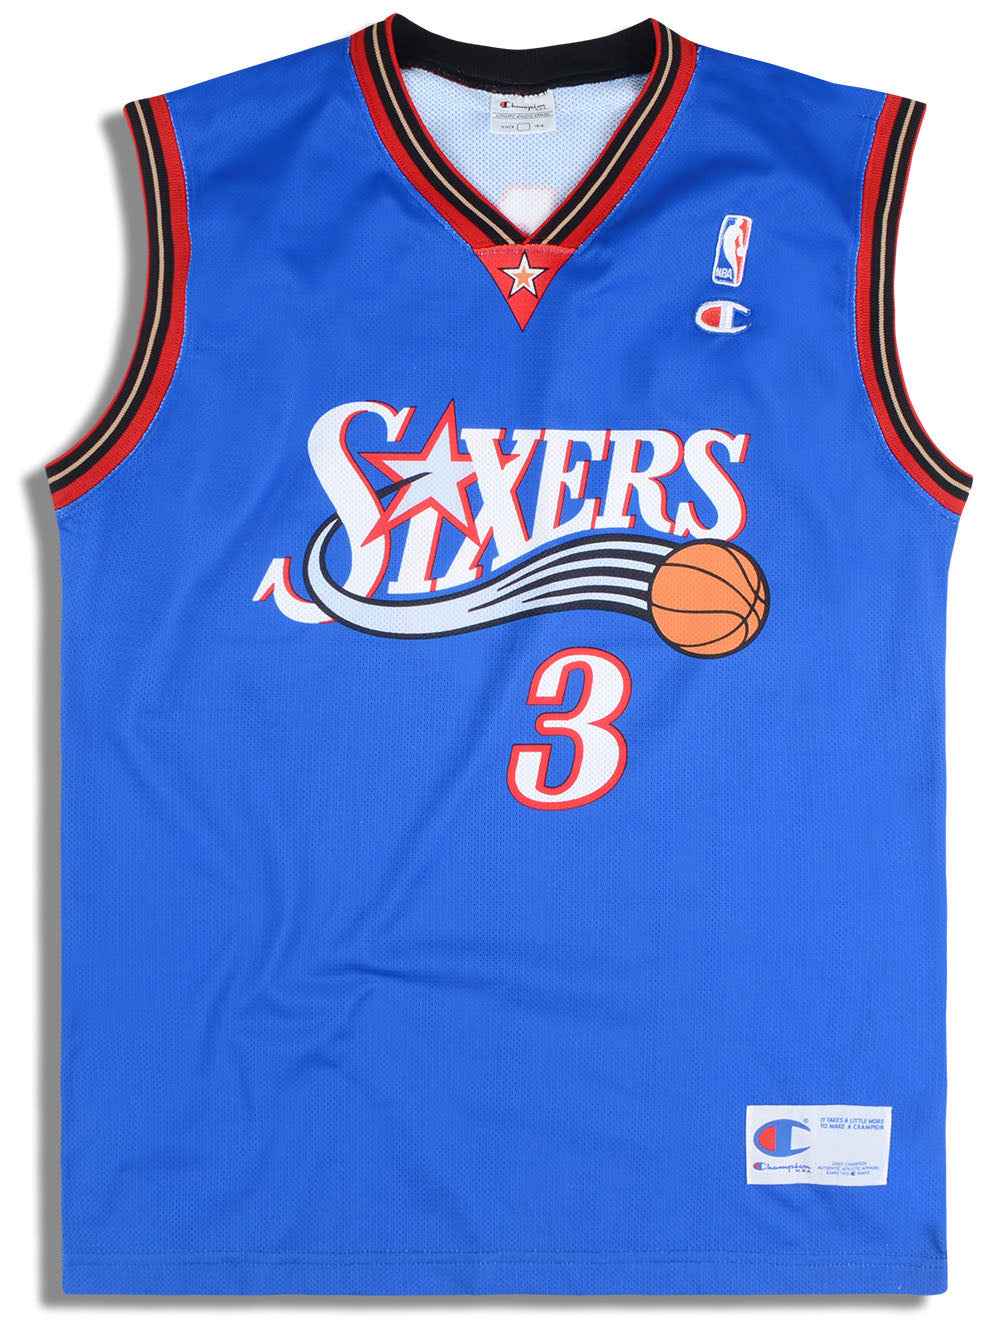 Sports / College Vintage Champion Philadelphia 76XERS Sixers Allen Iverson 3 Jersey Size 48 Late 1990s